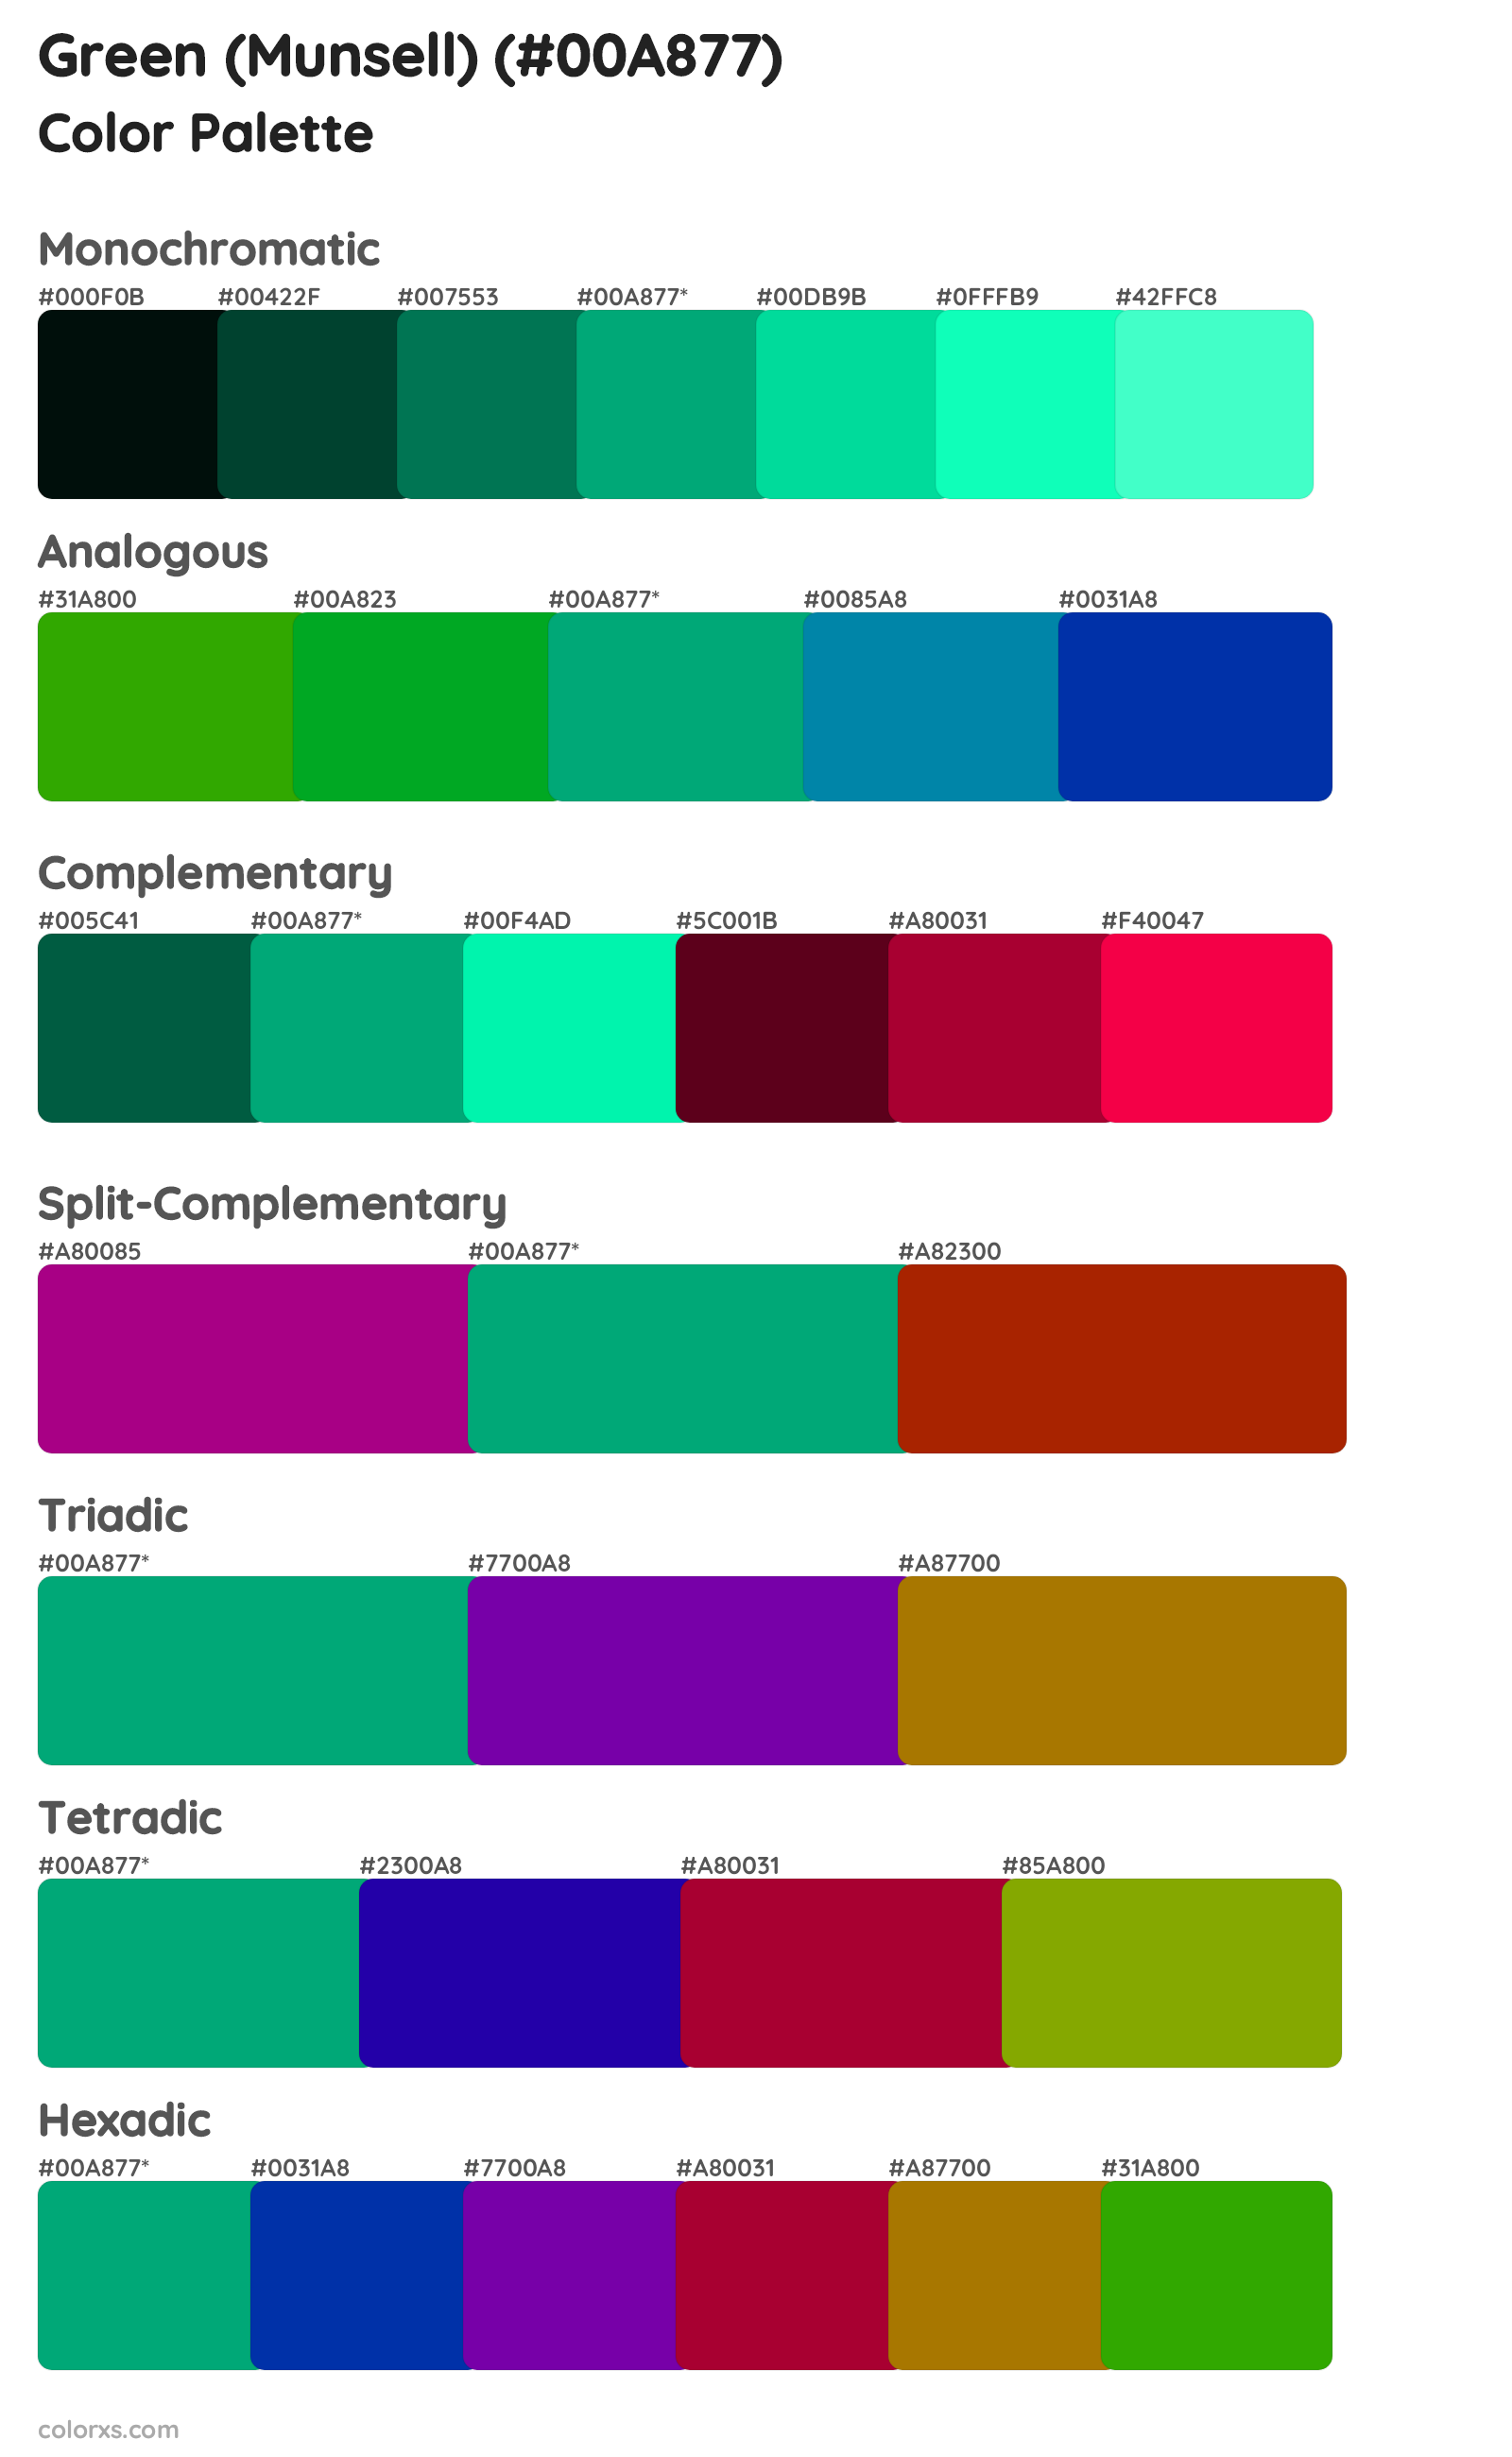 Green (Munsell) Color Scheme Palettes